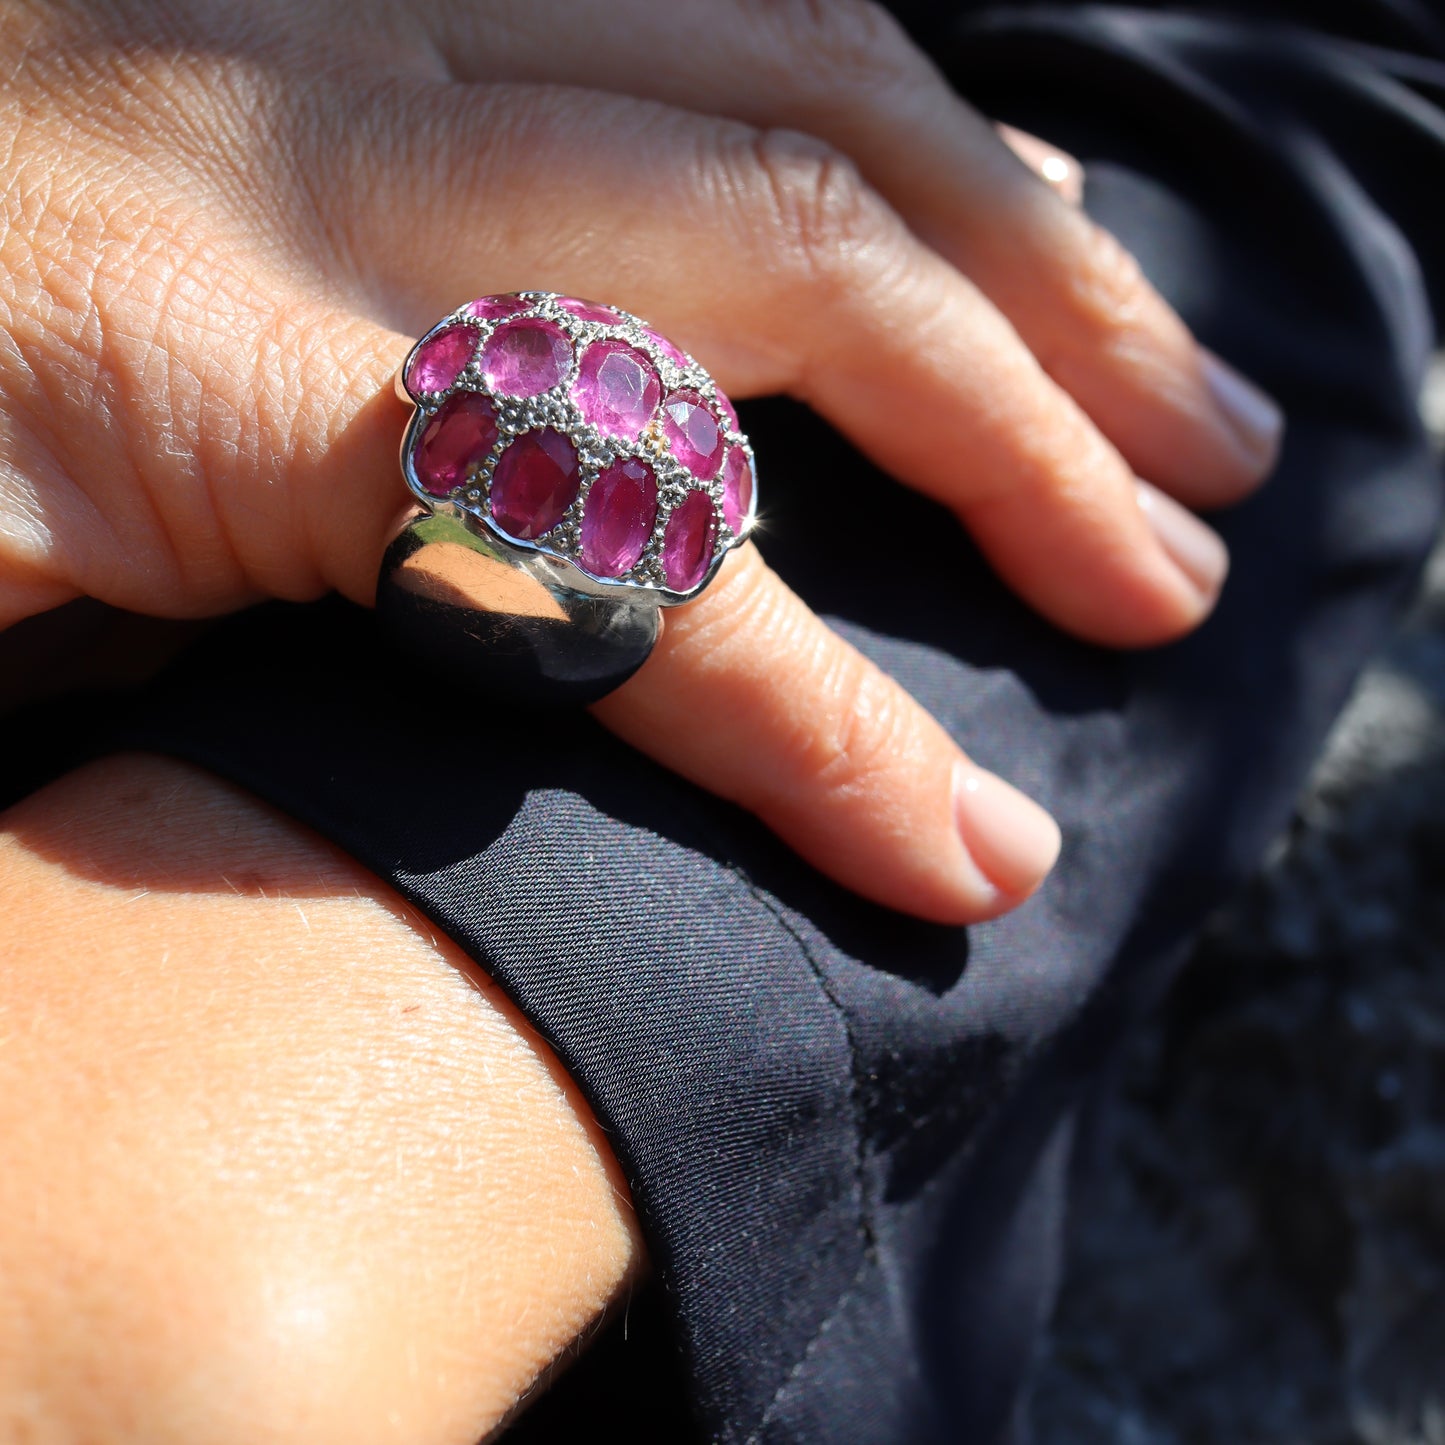 René Boivin 1980s 18KT White Gold Pink Sapphire Ring worn on hand